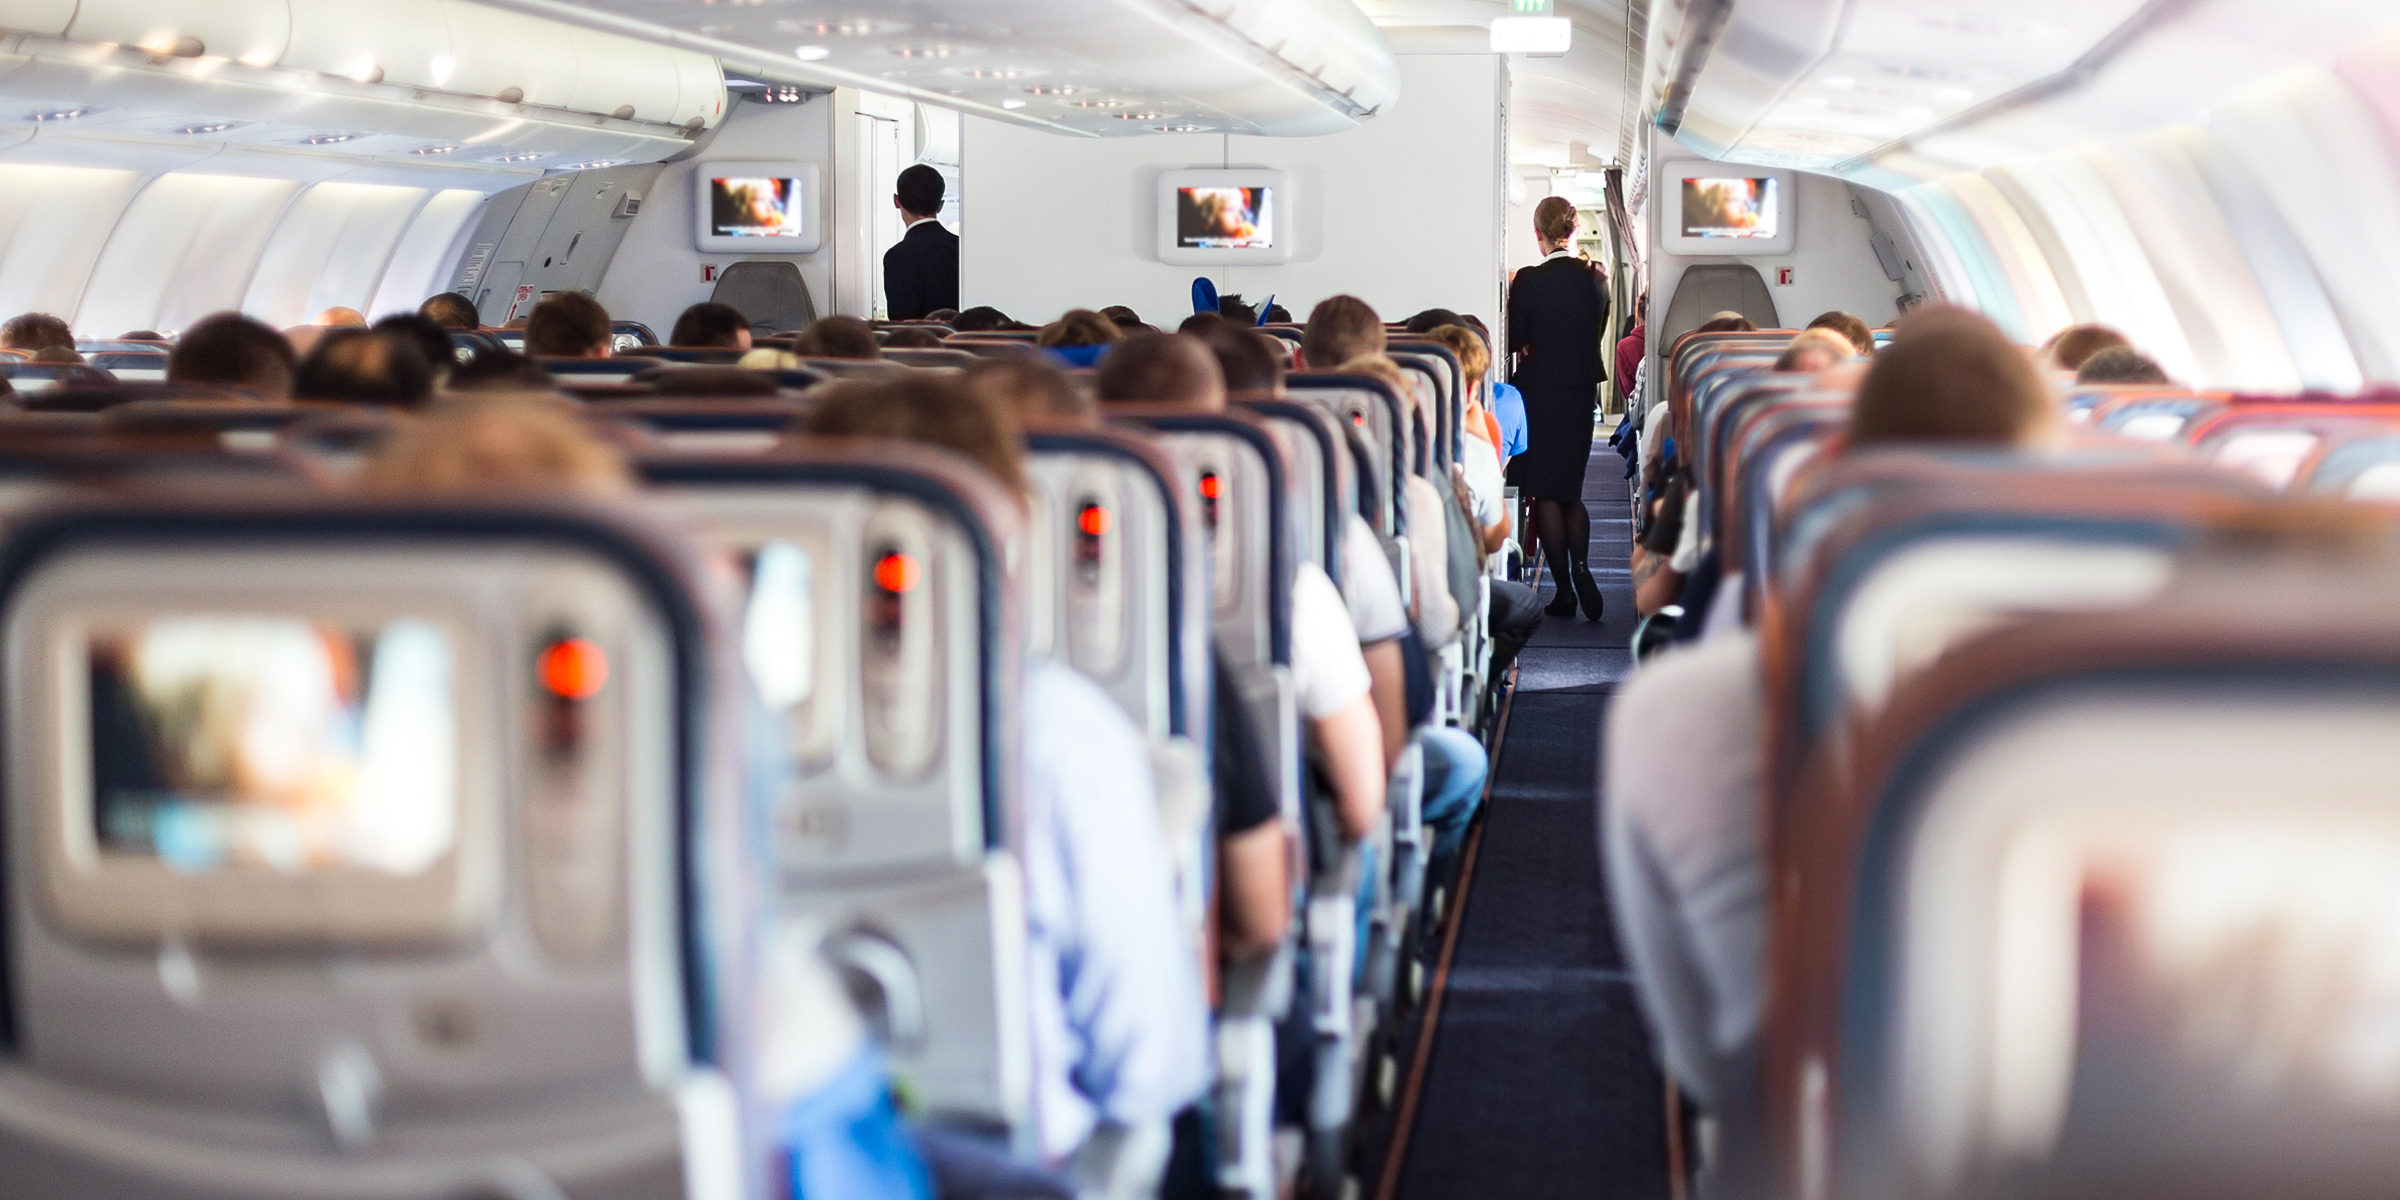 The inside of a full airline | Source: Shutterstock